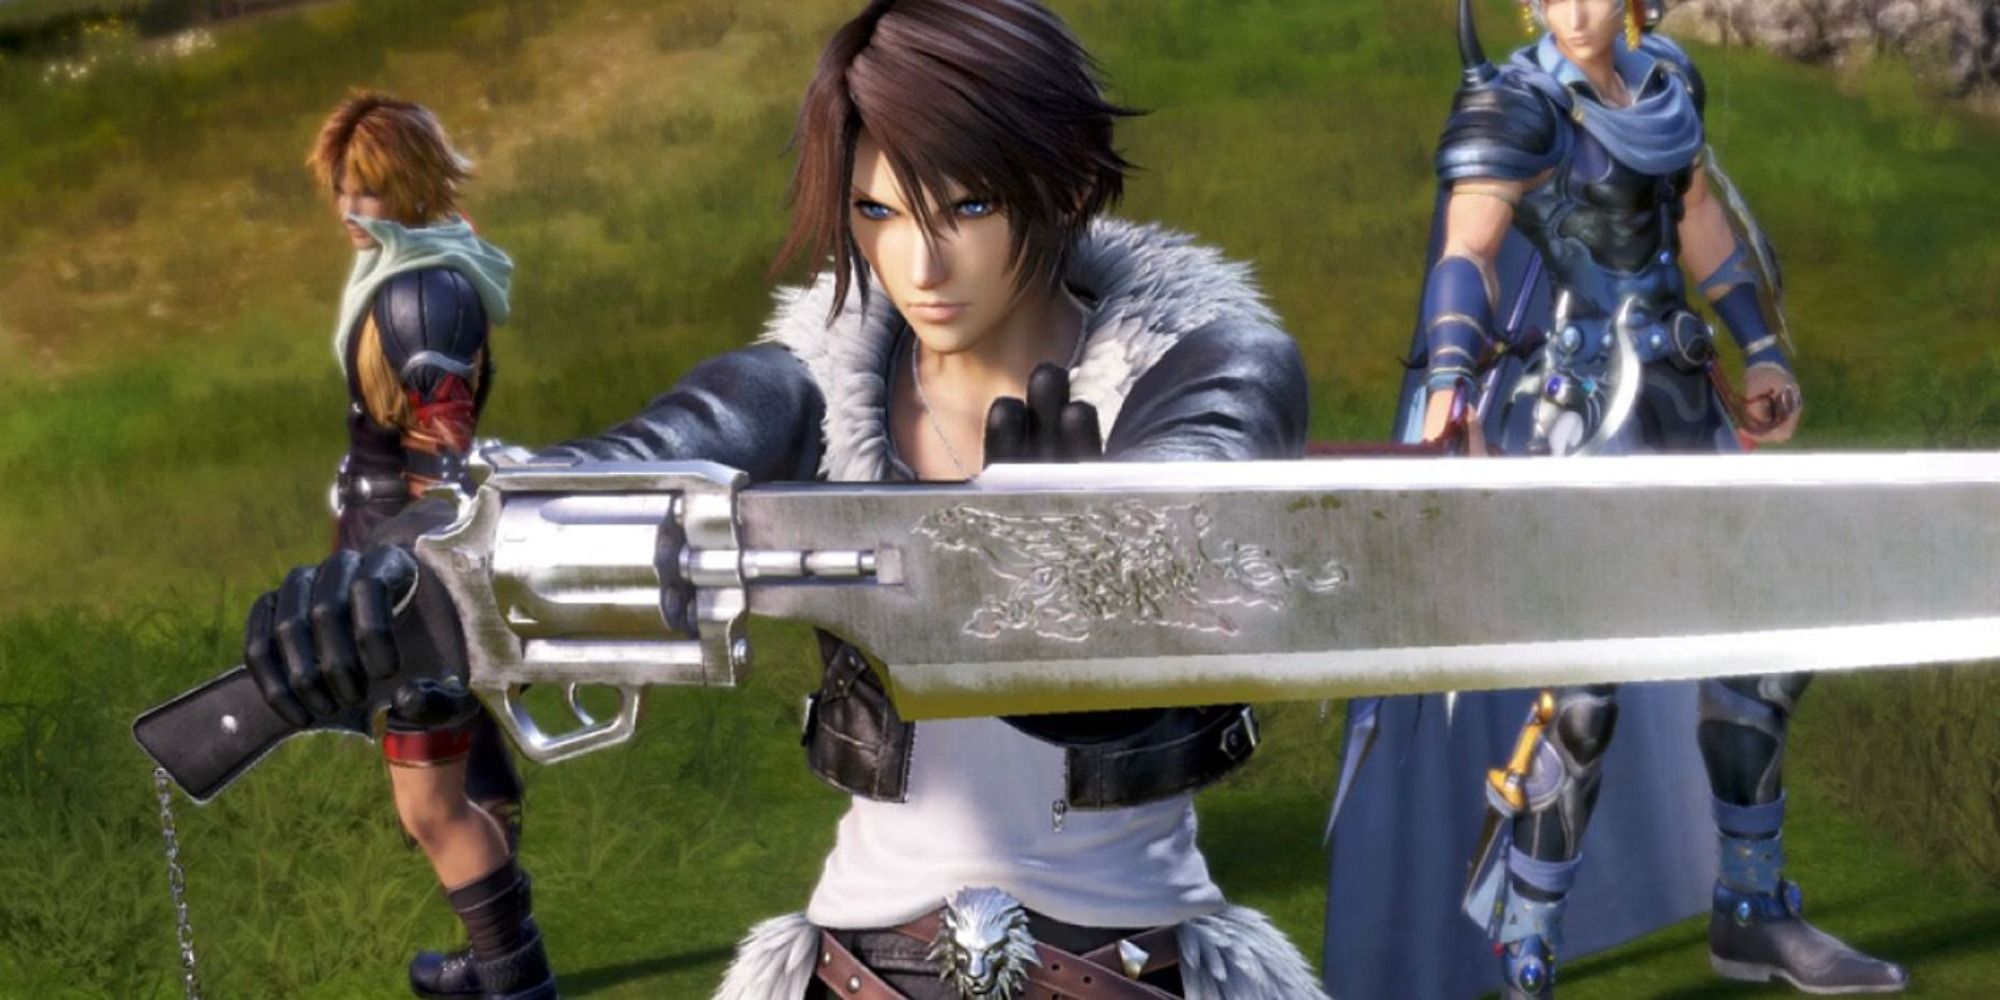 Squall wielding his Gunblade in Final Fantasy 8